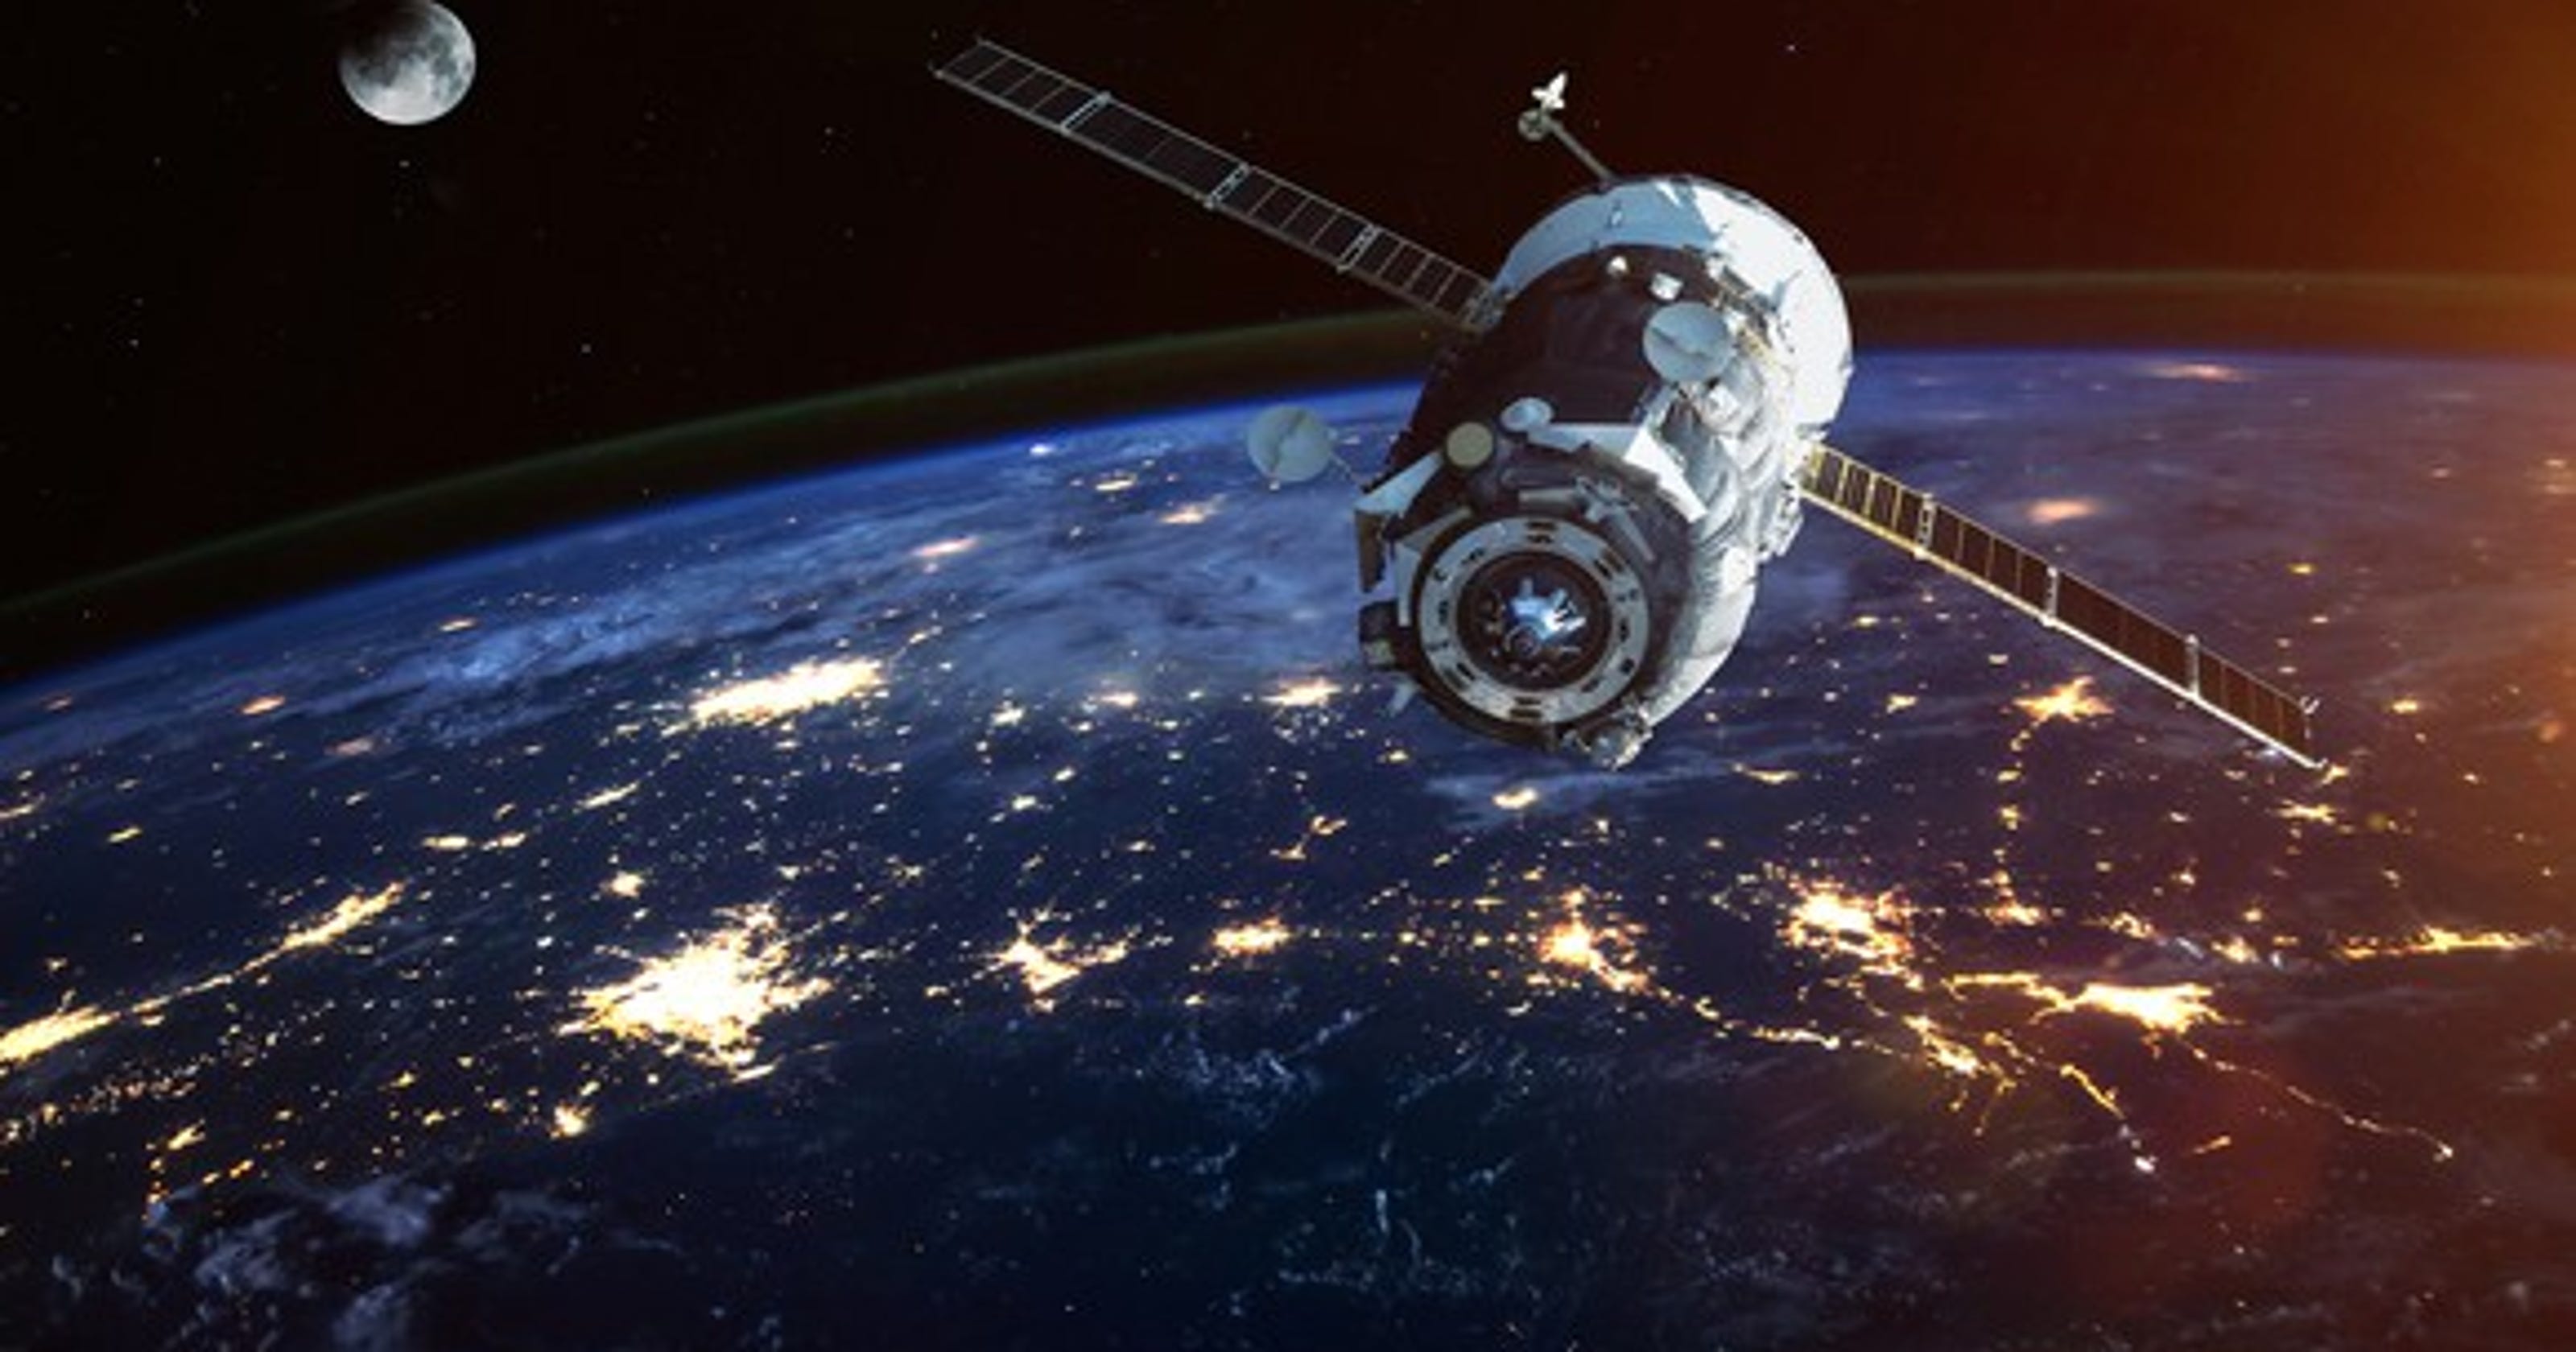 space-junk-from-satellites-is-a-security-threat-trump-should-address